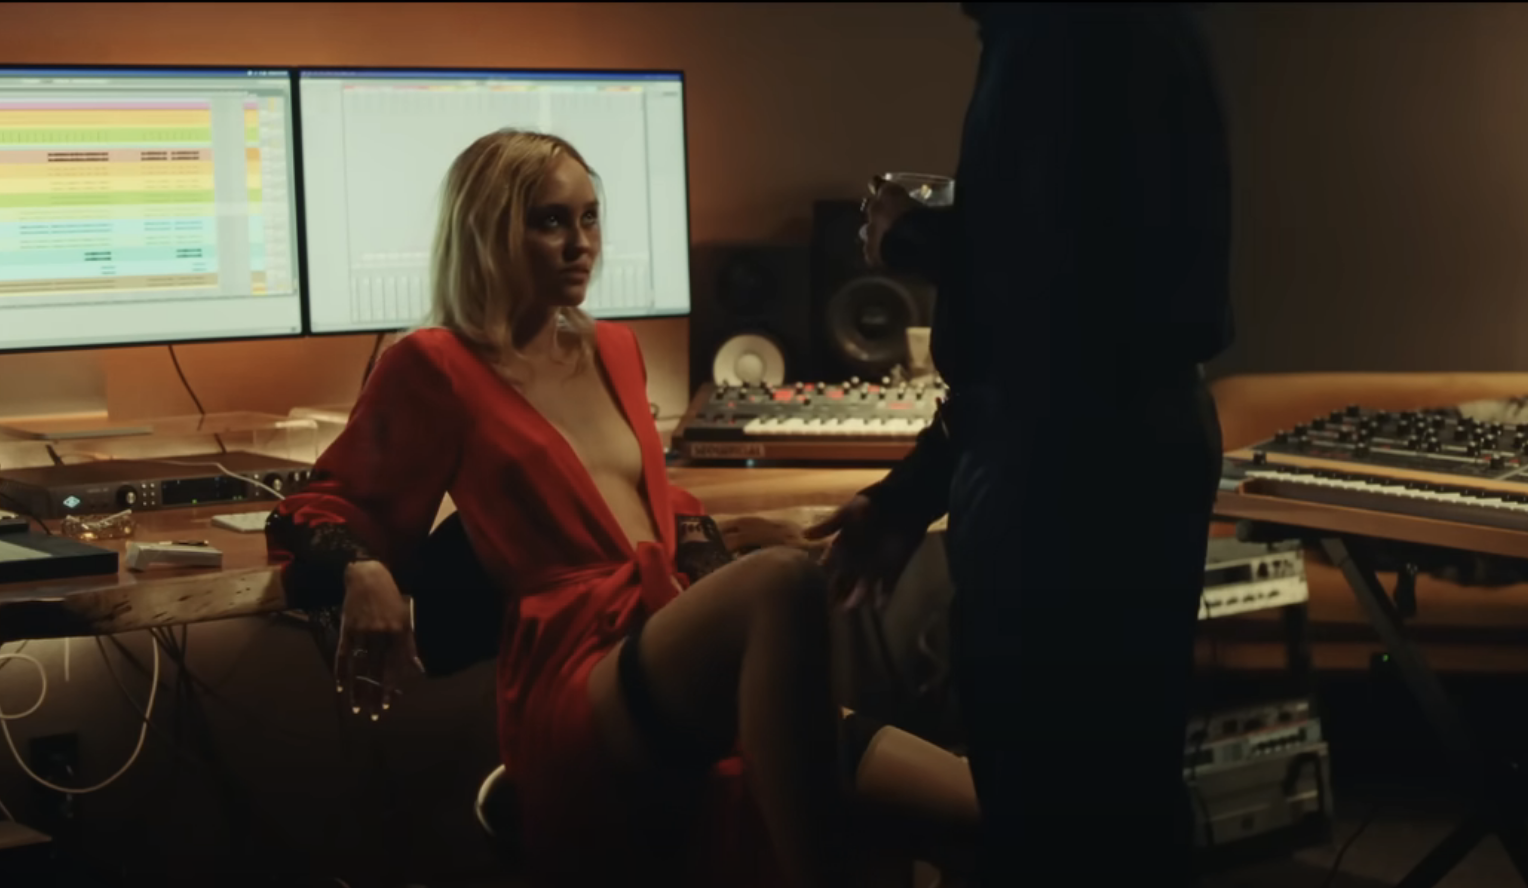 Lily-Rose&#x27;s character sits in a chair in a music studio and looks up while a man standing touches her knee